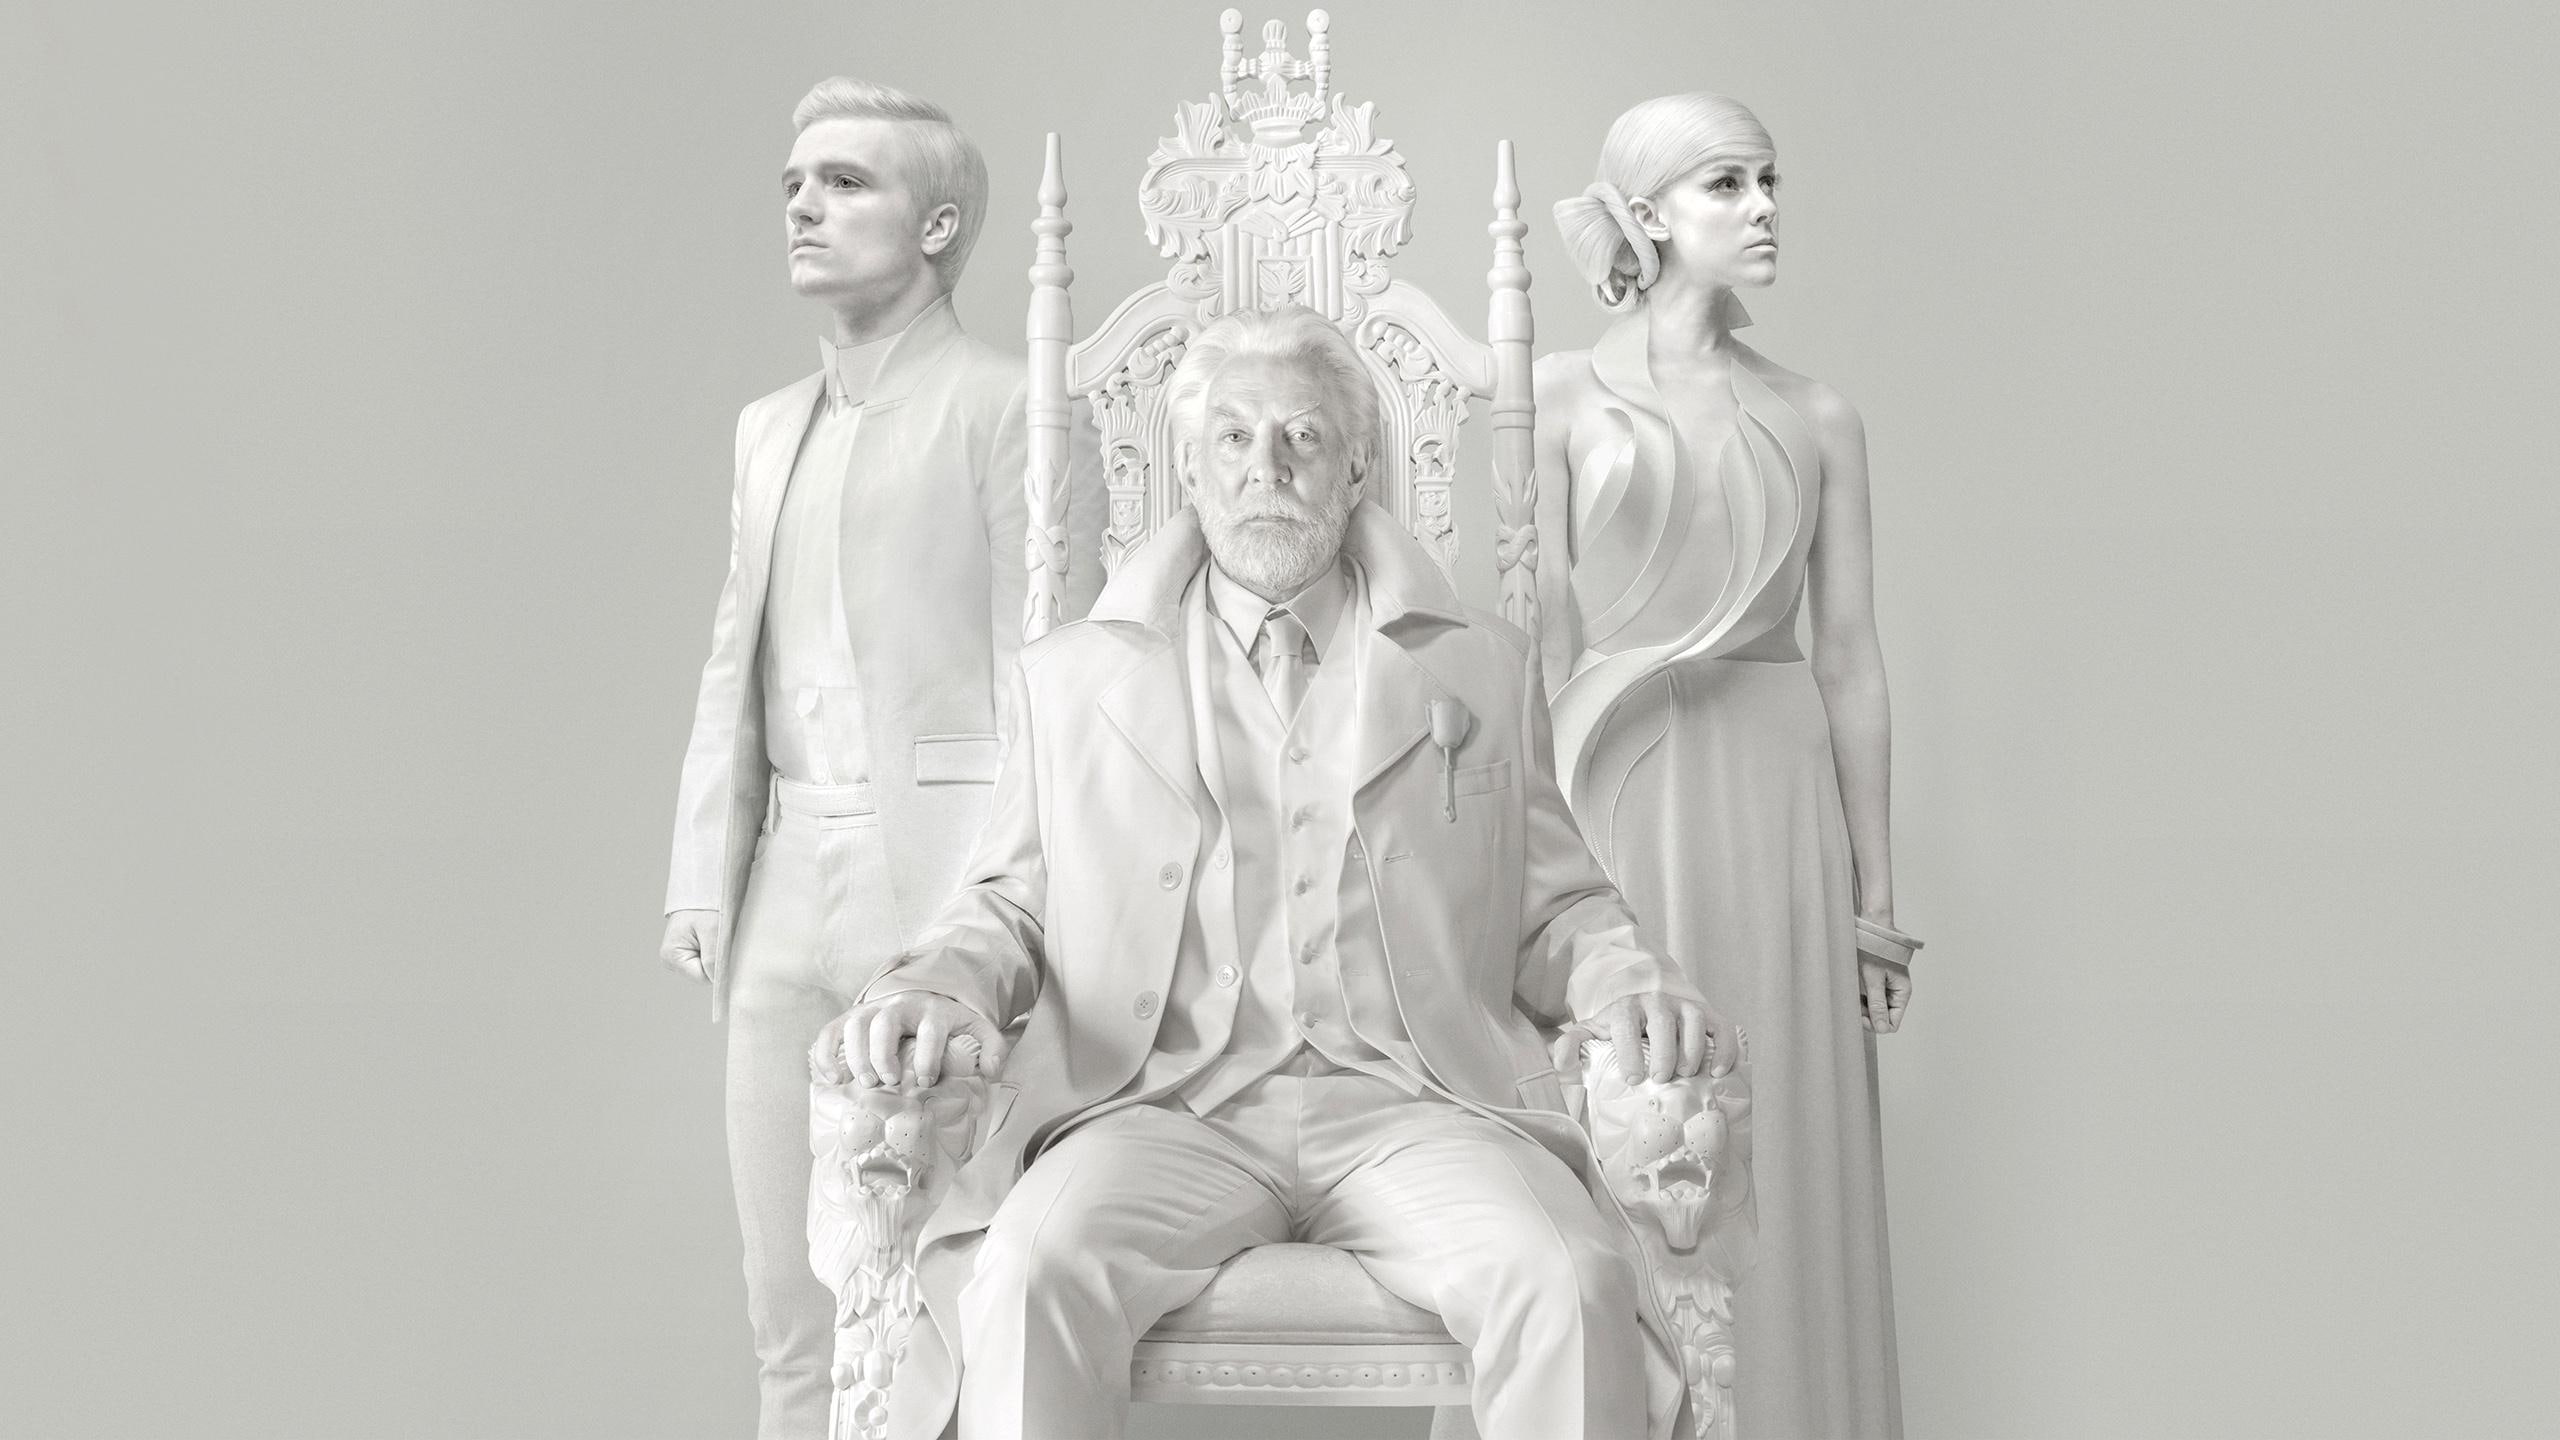 Josh, Donald Jena Malone In The Hunger Game, man sitting on chair between man and woman